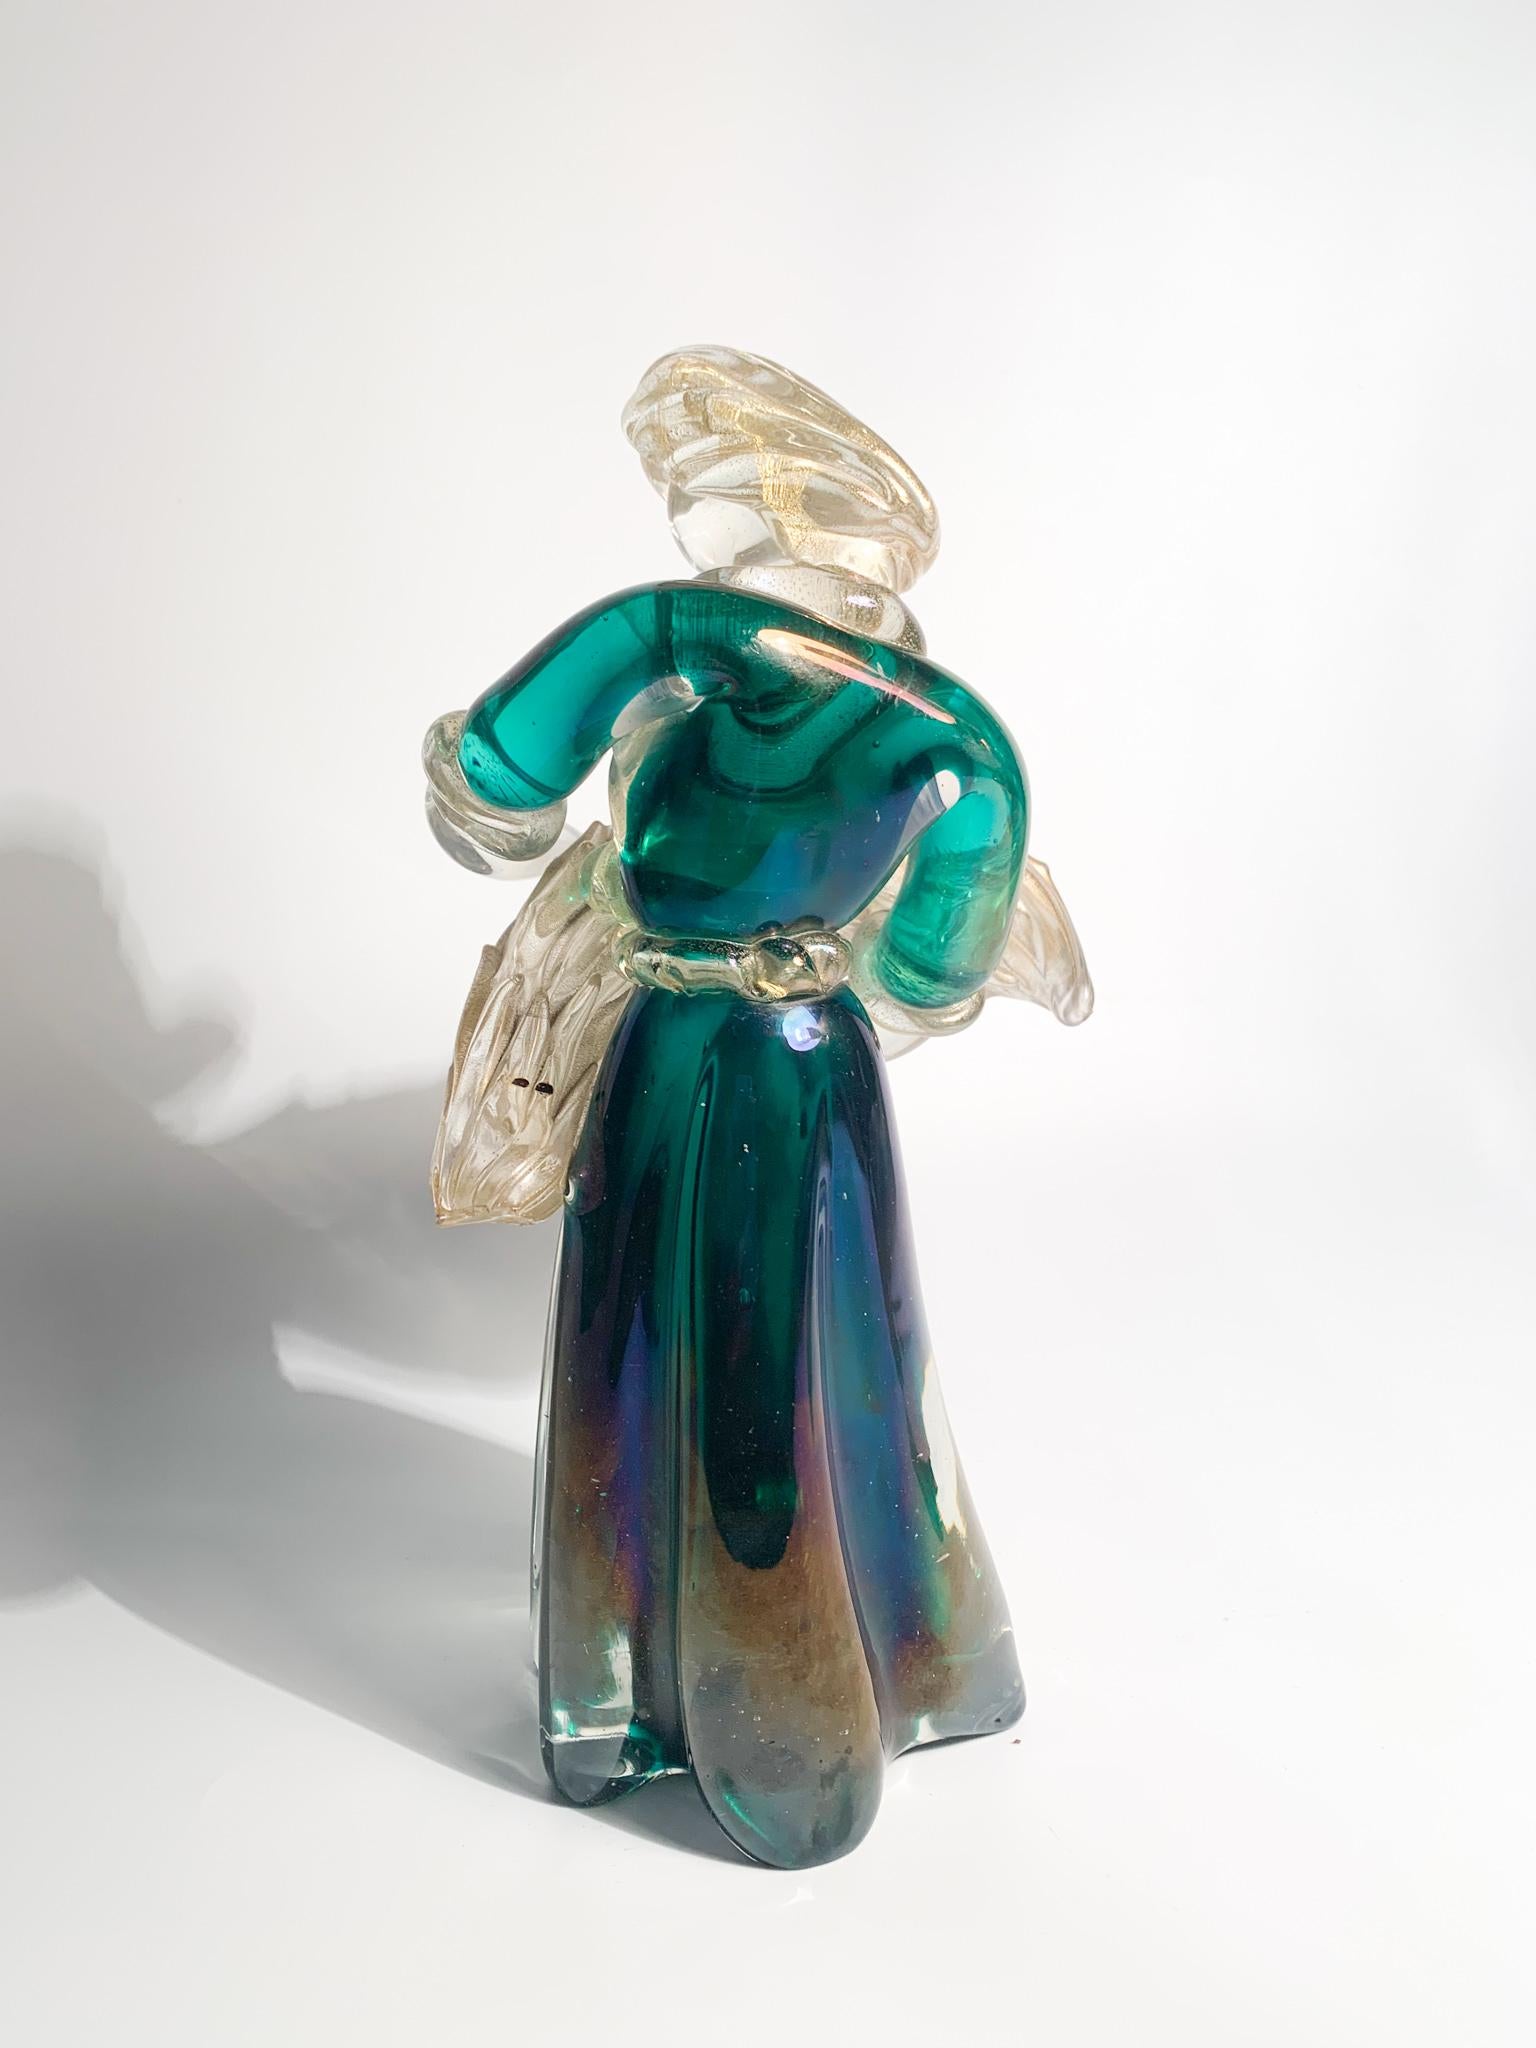 Iridescent Murano Glass Sculpture with Gold Leaves by Archimede Seguso 1940s For Sale 3